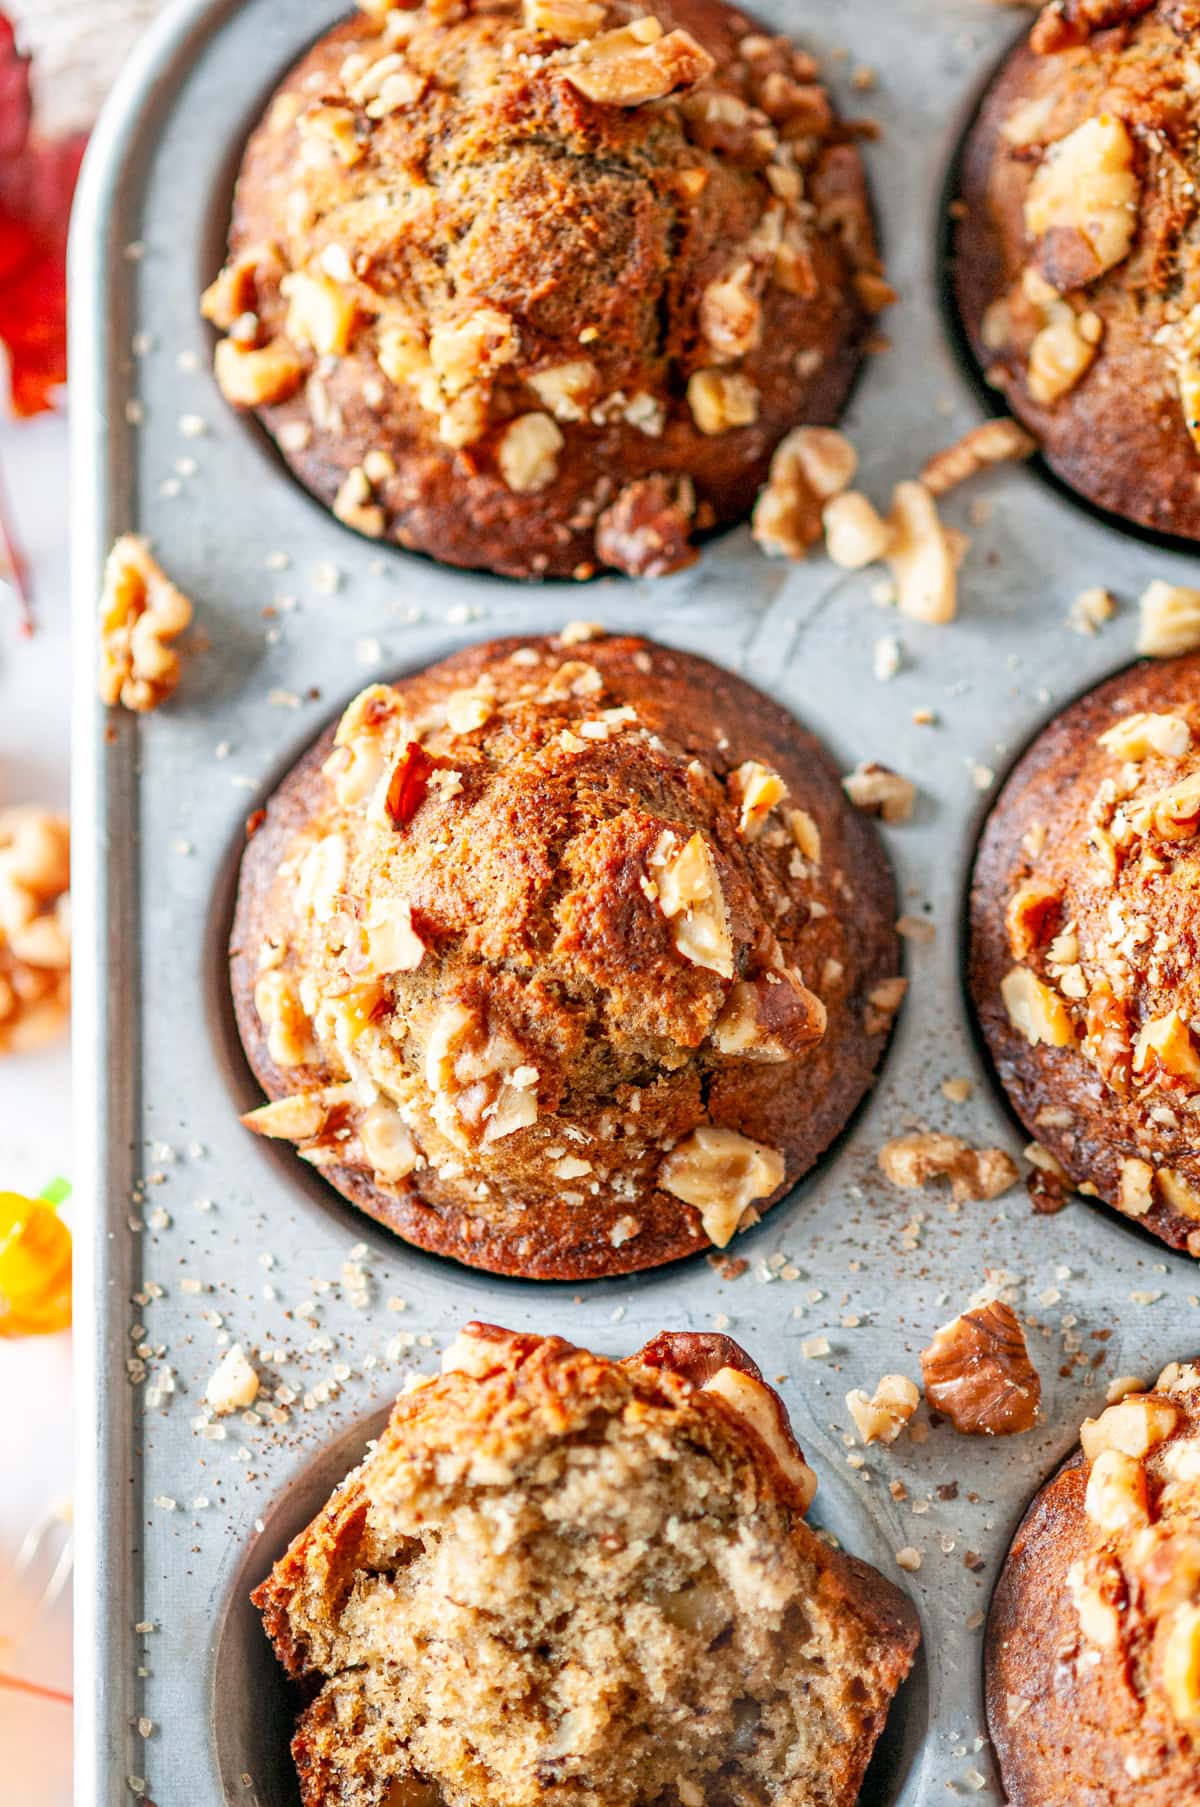 Maple banana muffins in gray metal muffin pan with walnuts and leaves on white marble